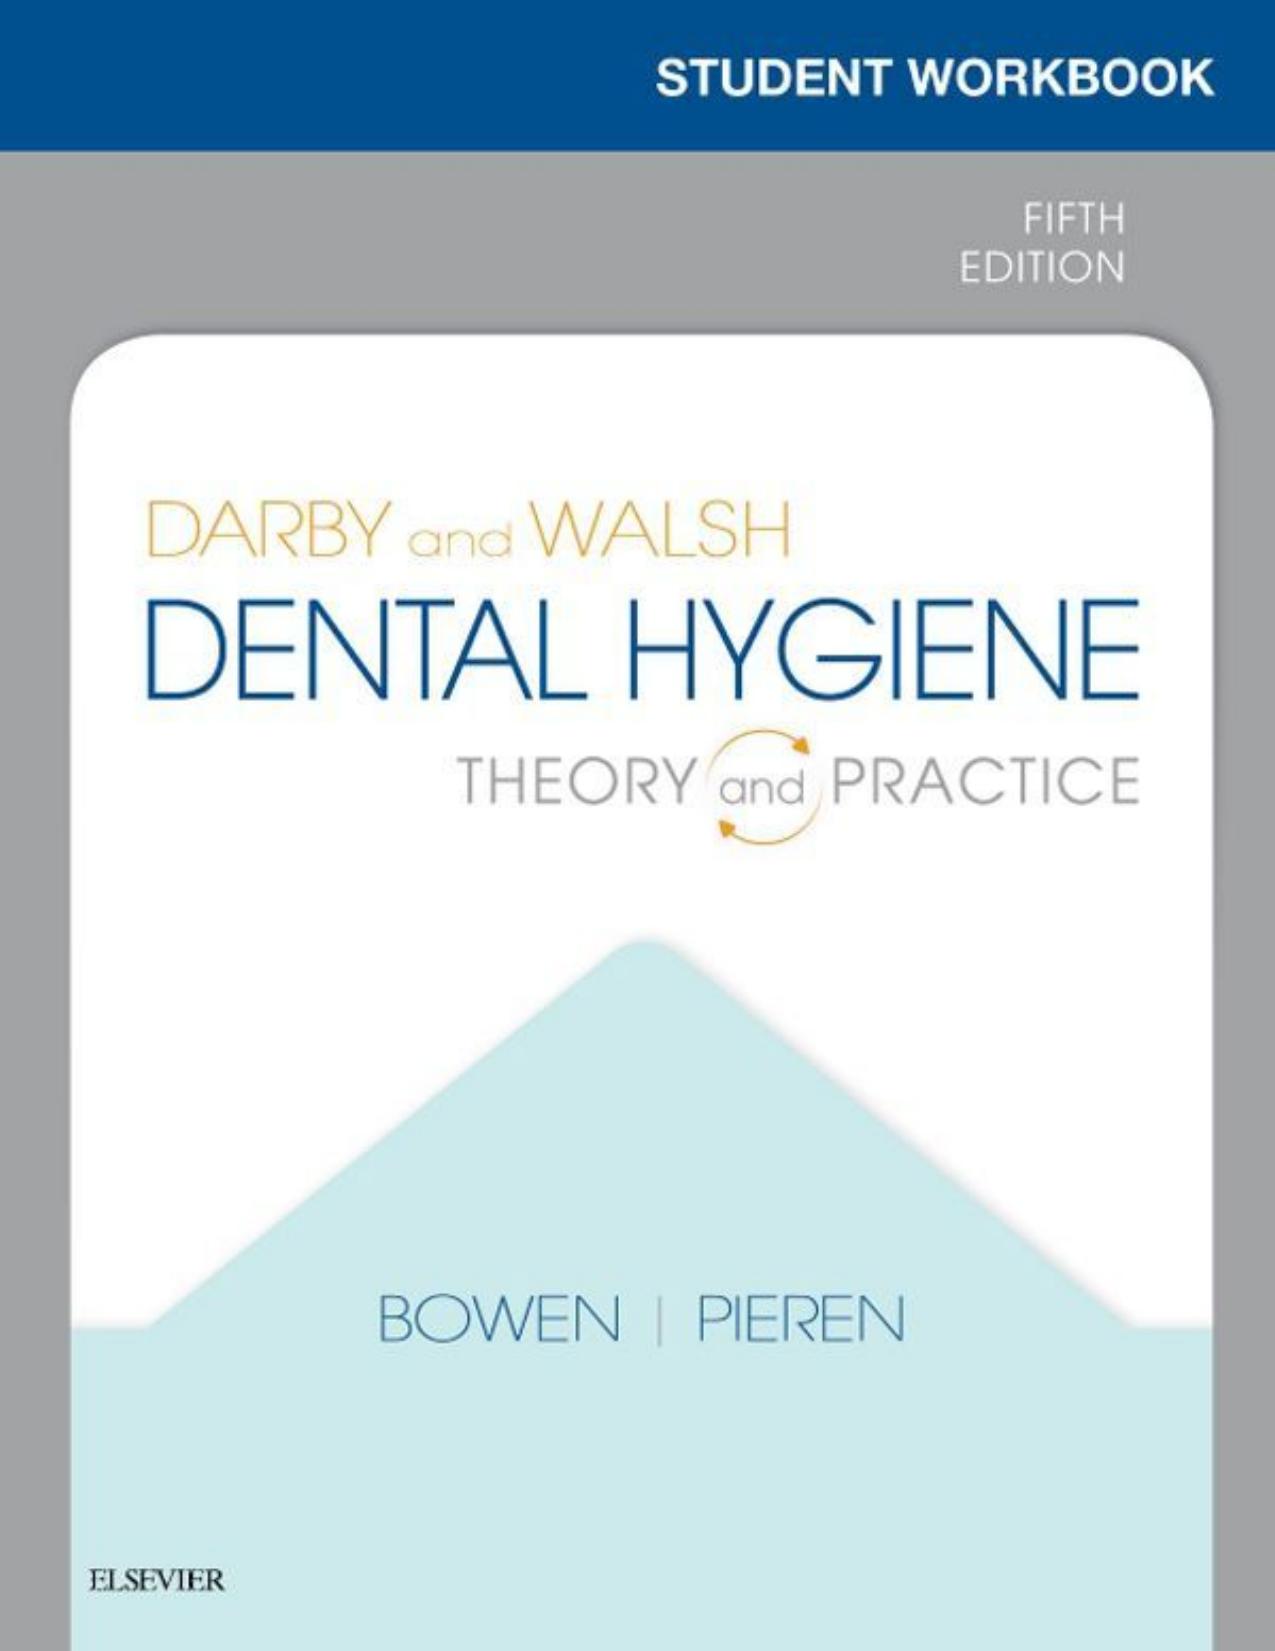 Workbook for Darby  and  Walsh Dental Hygiene: Theory and Practice 5th Edition by Elsevier